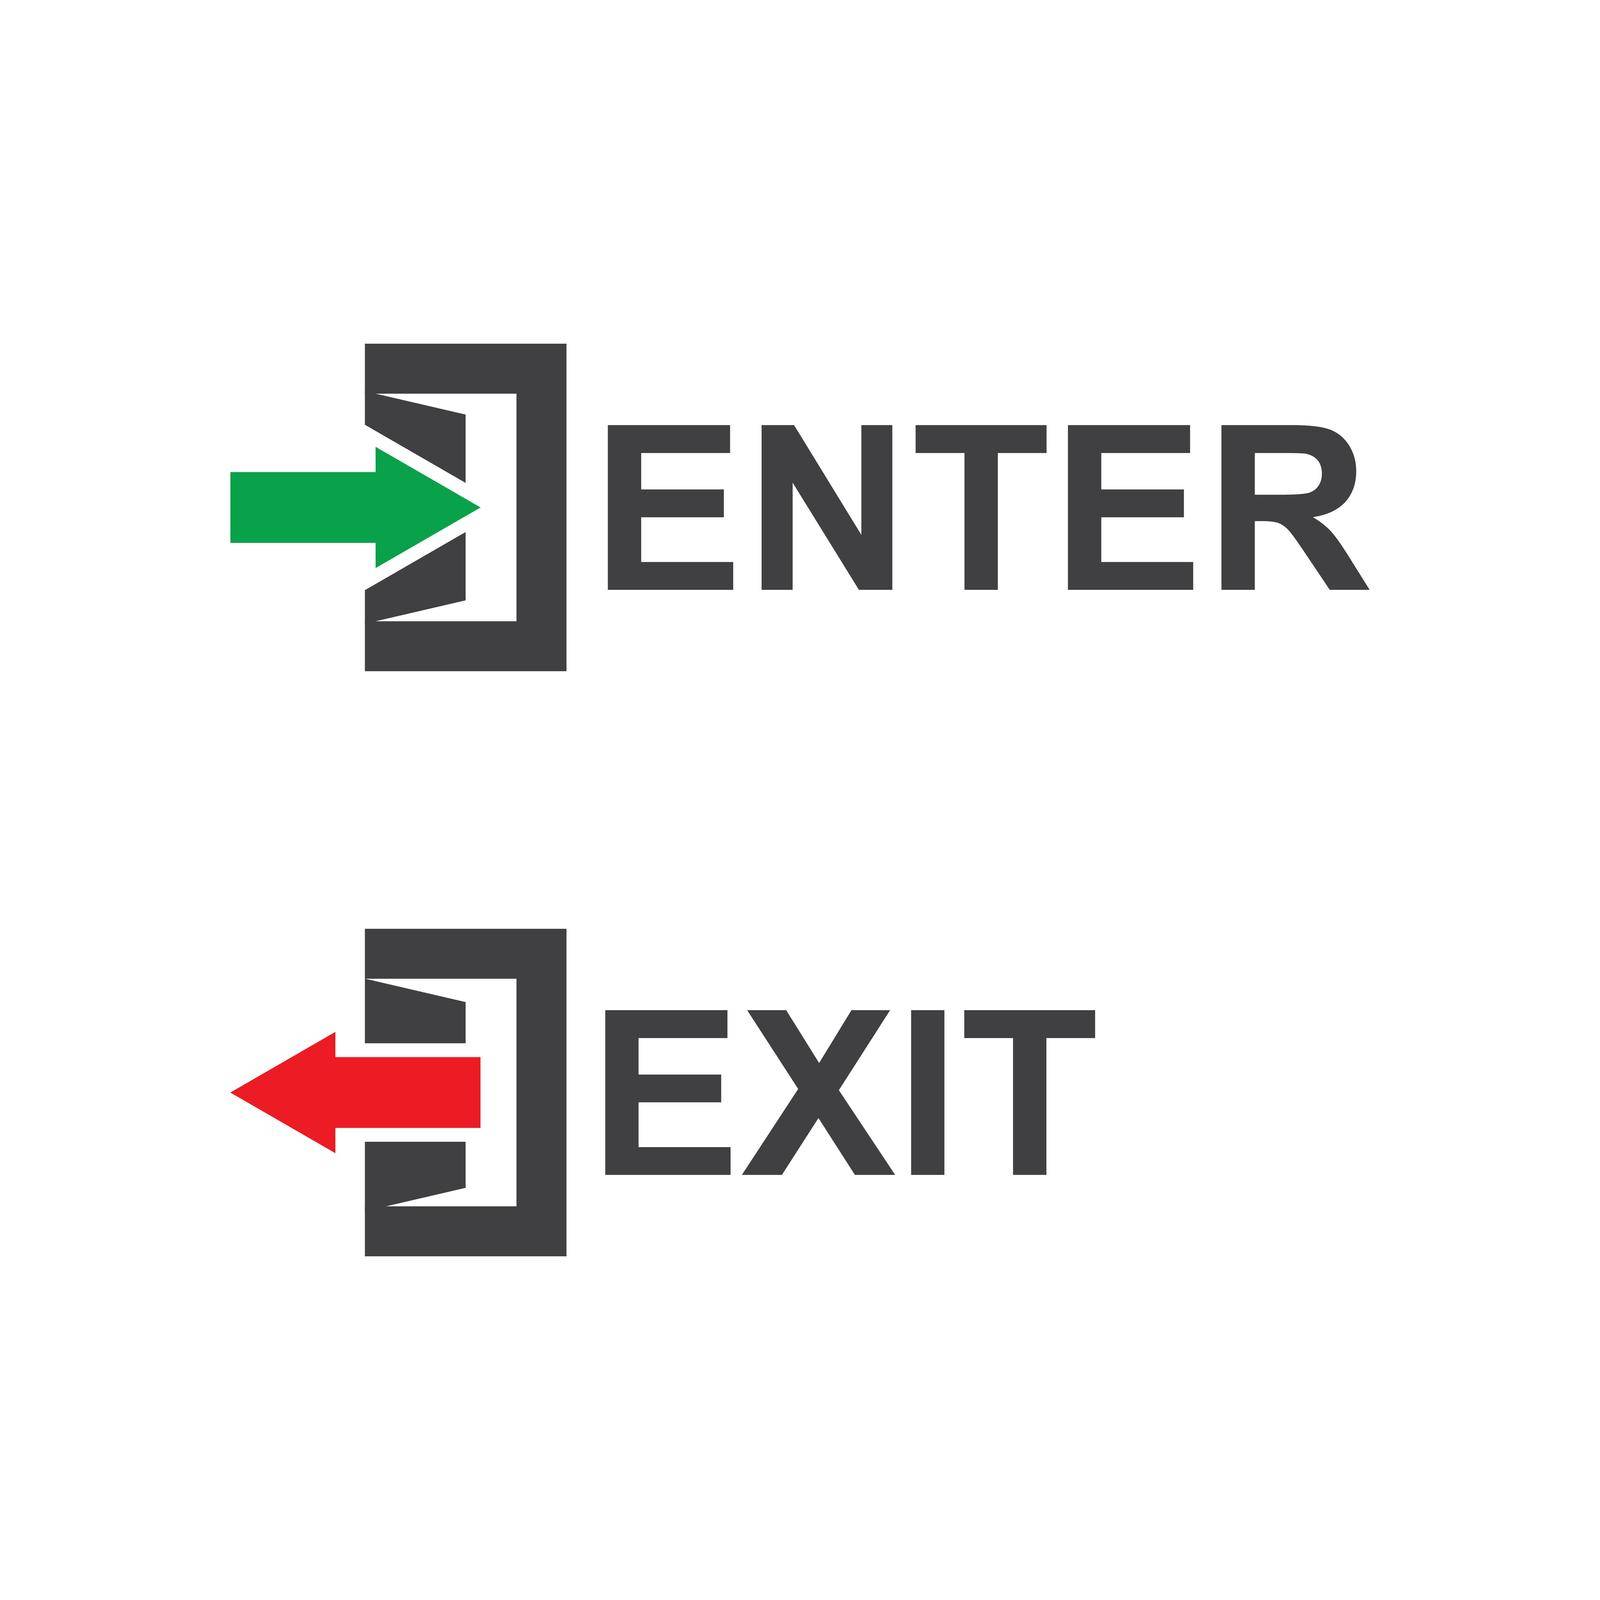 Enter and exit icon by awk